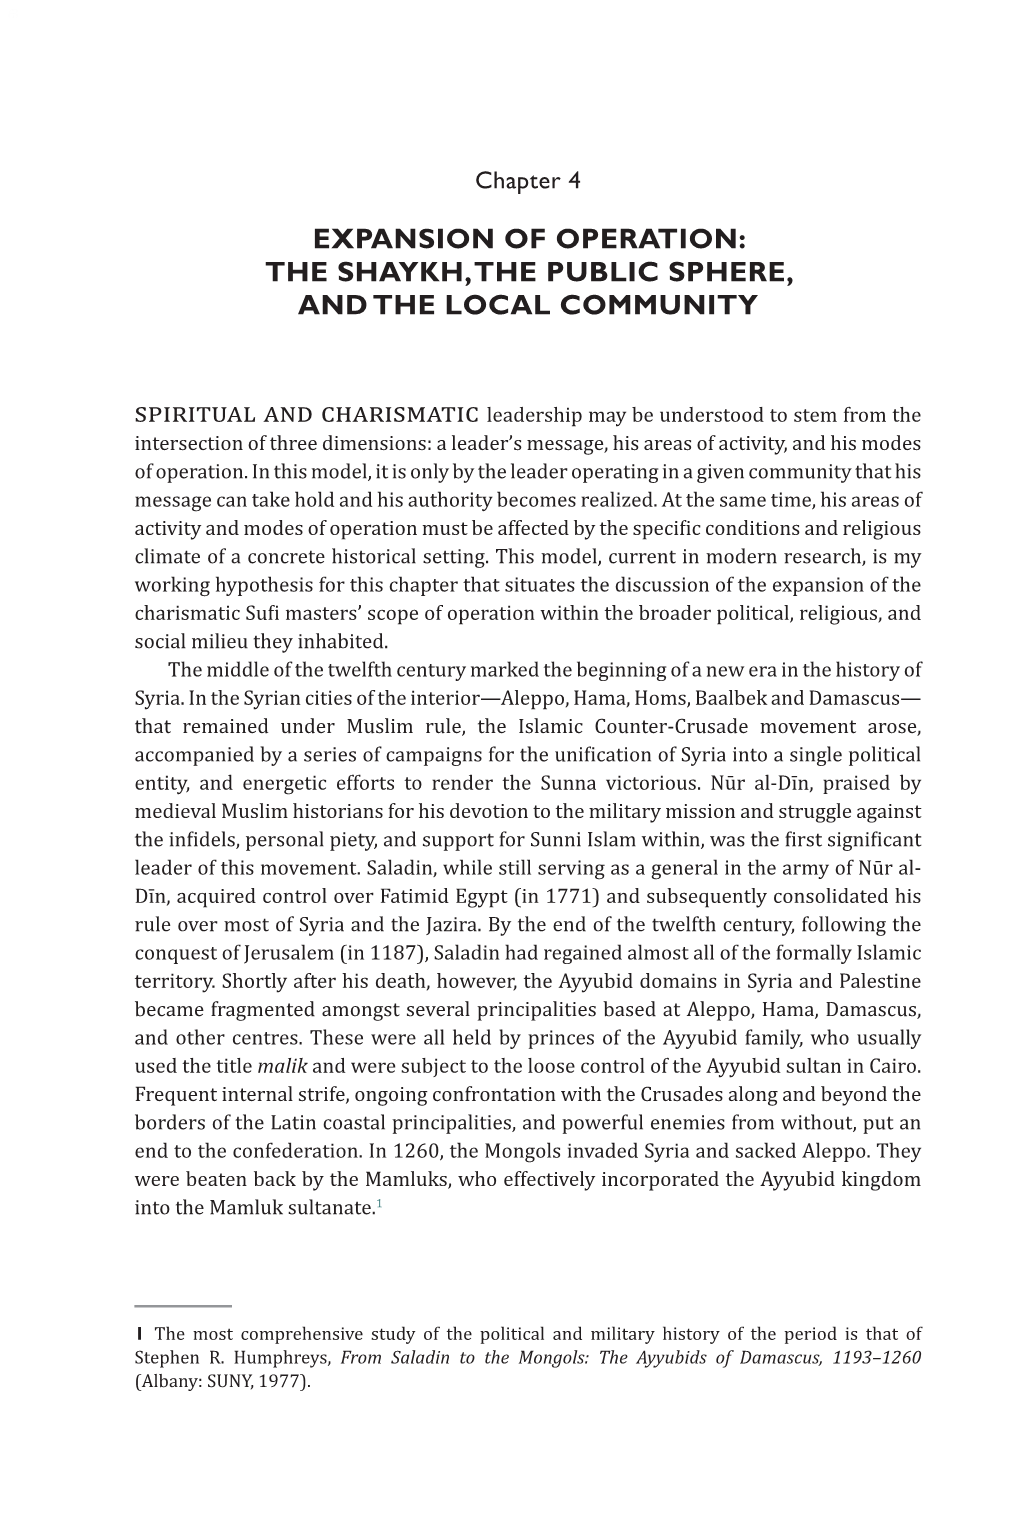 Expansion of Operation: the Shaykh, the Public Sphere, and the Local Community